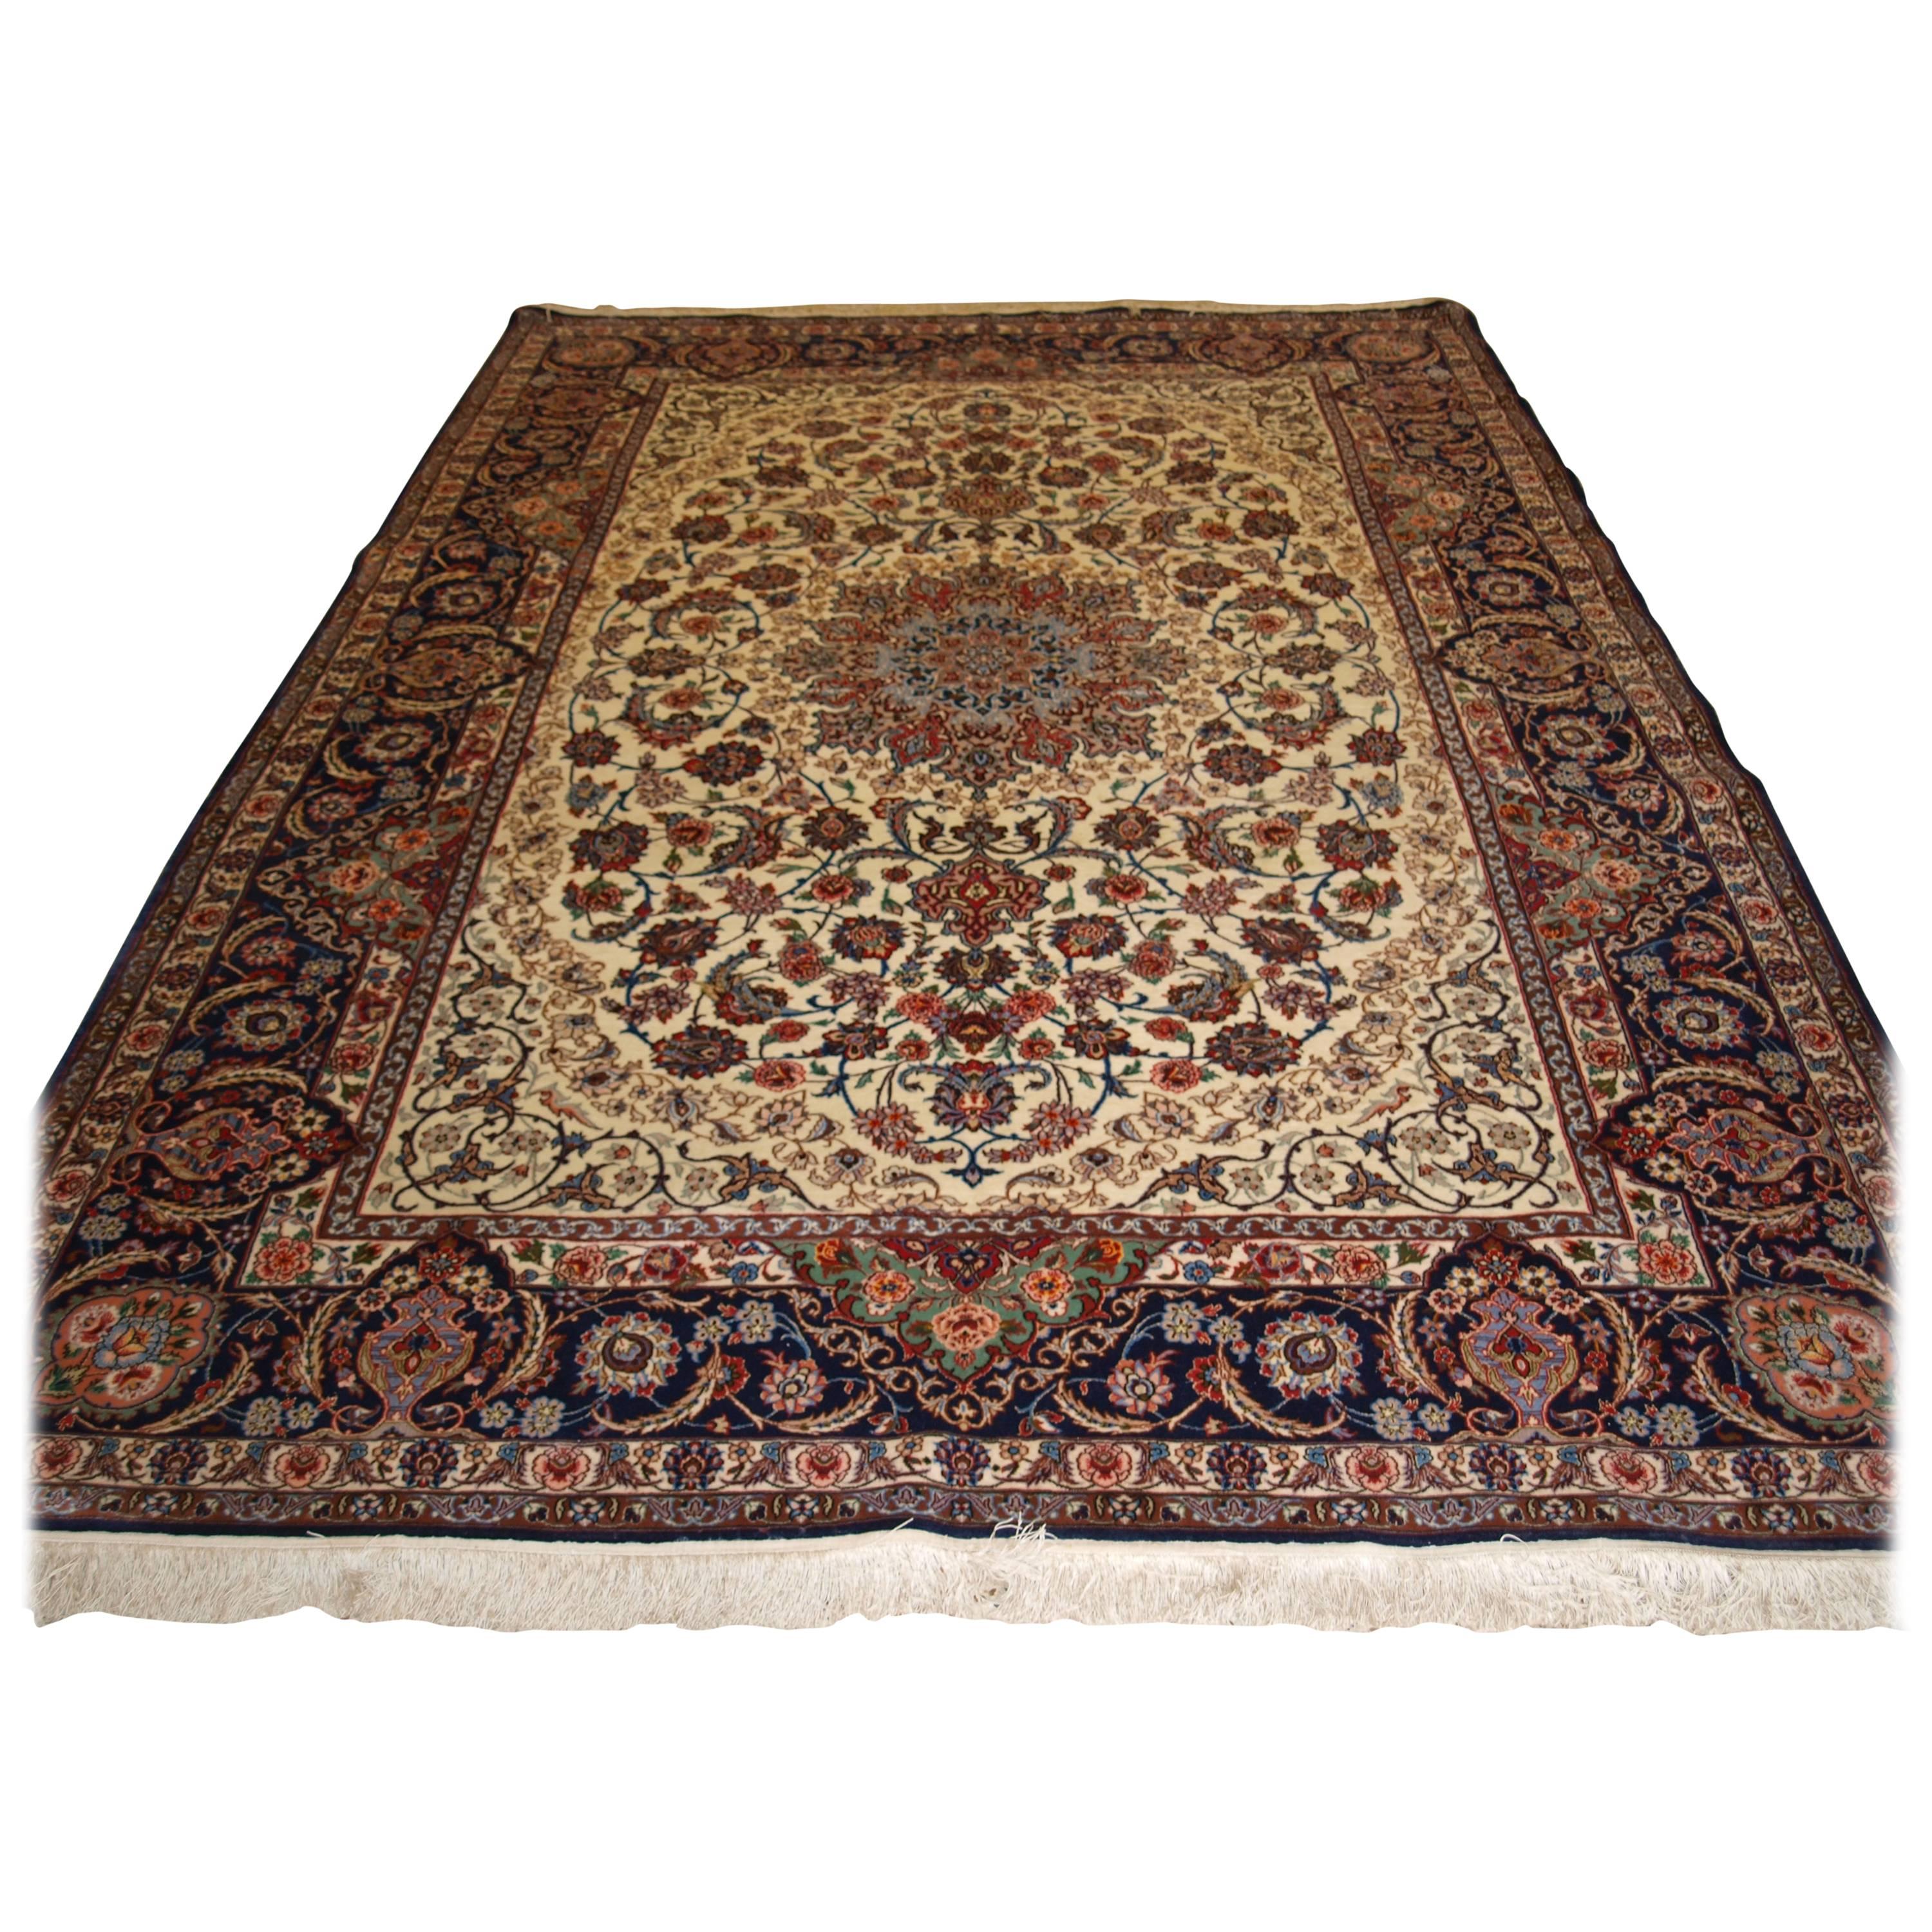 Old Persian Isfahan Carpet, Wool and Silk on a Very Fine Silk Foundation For Sale